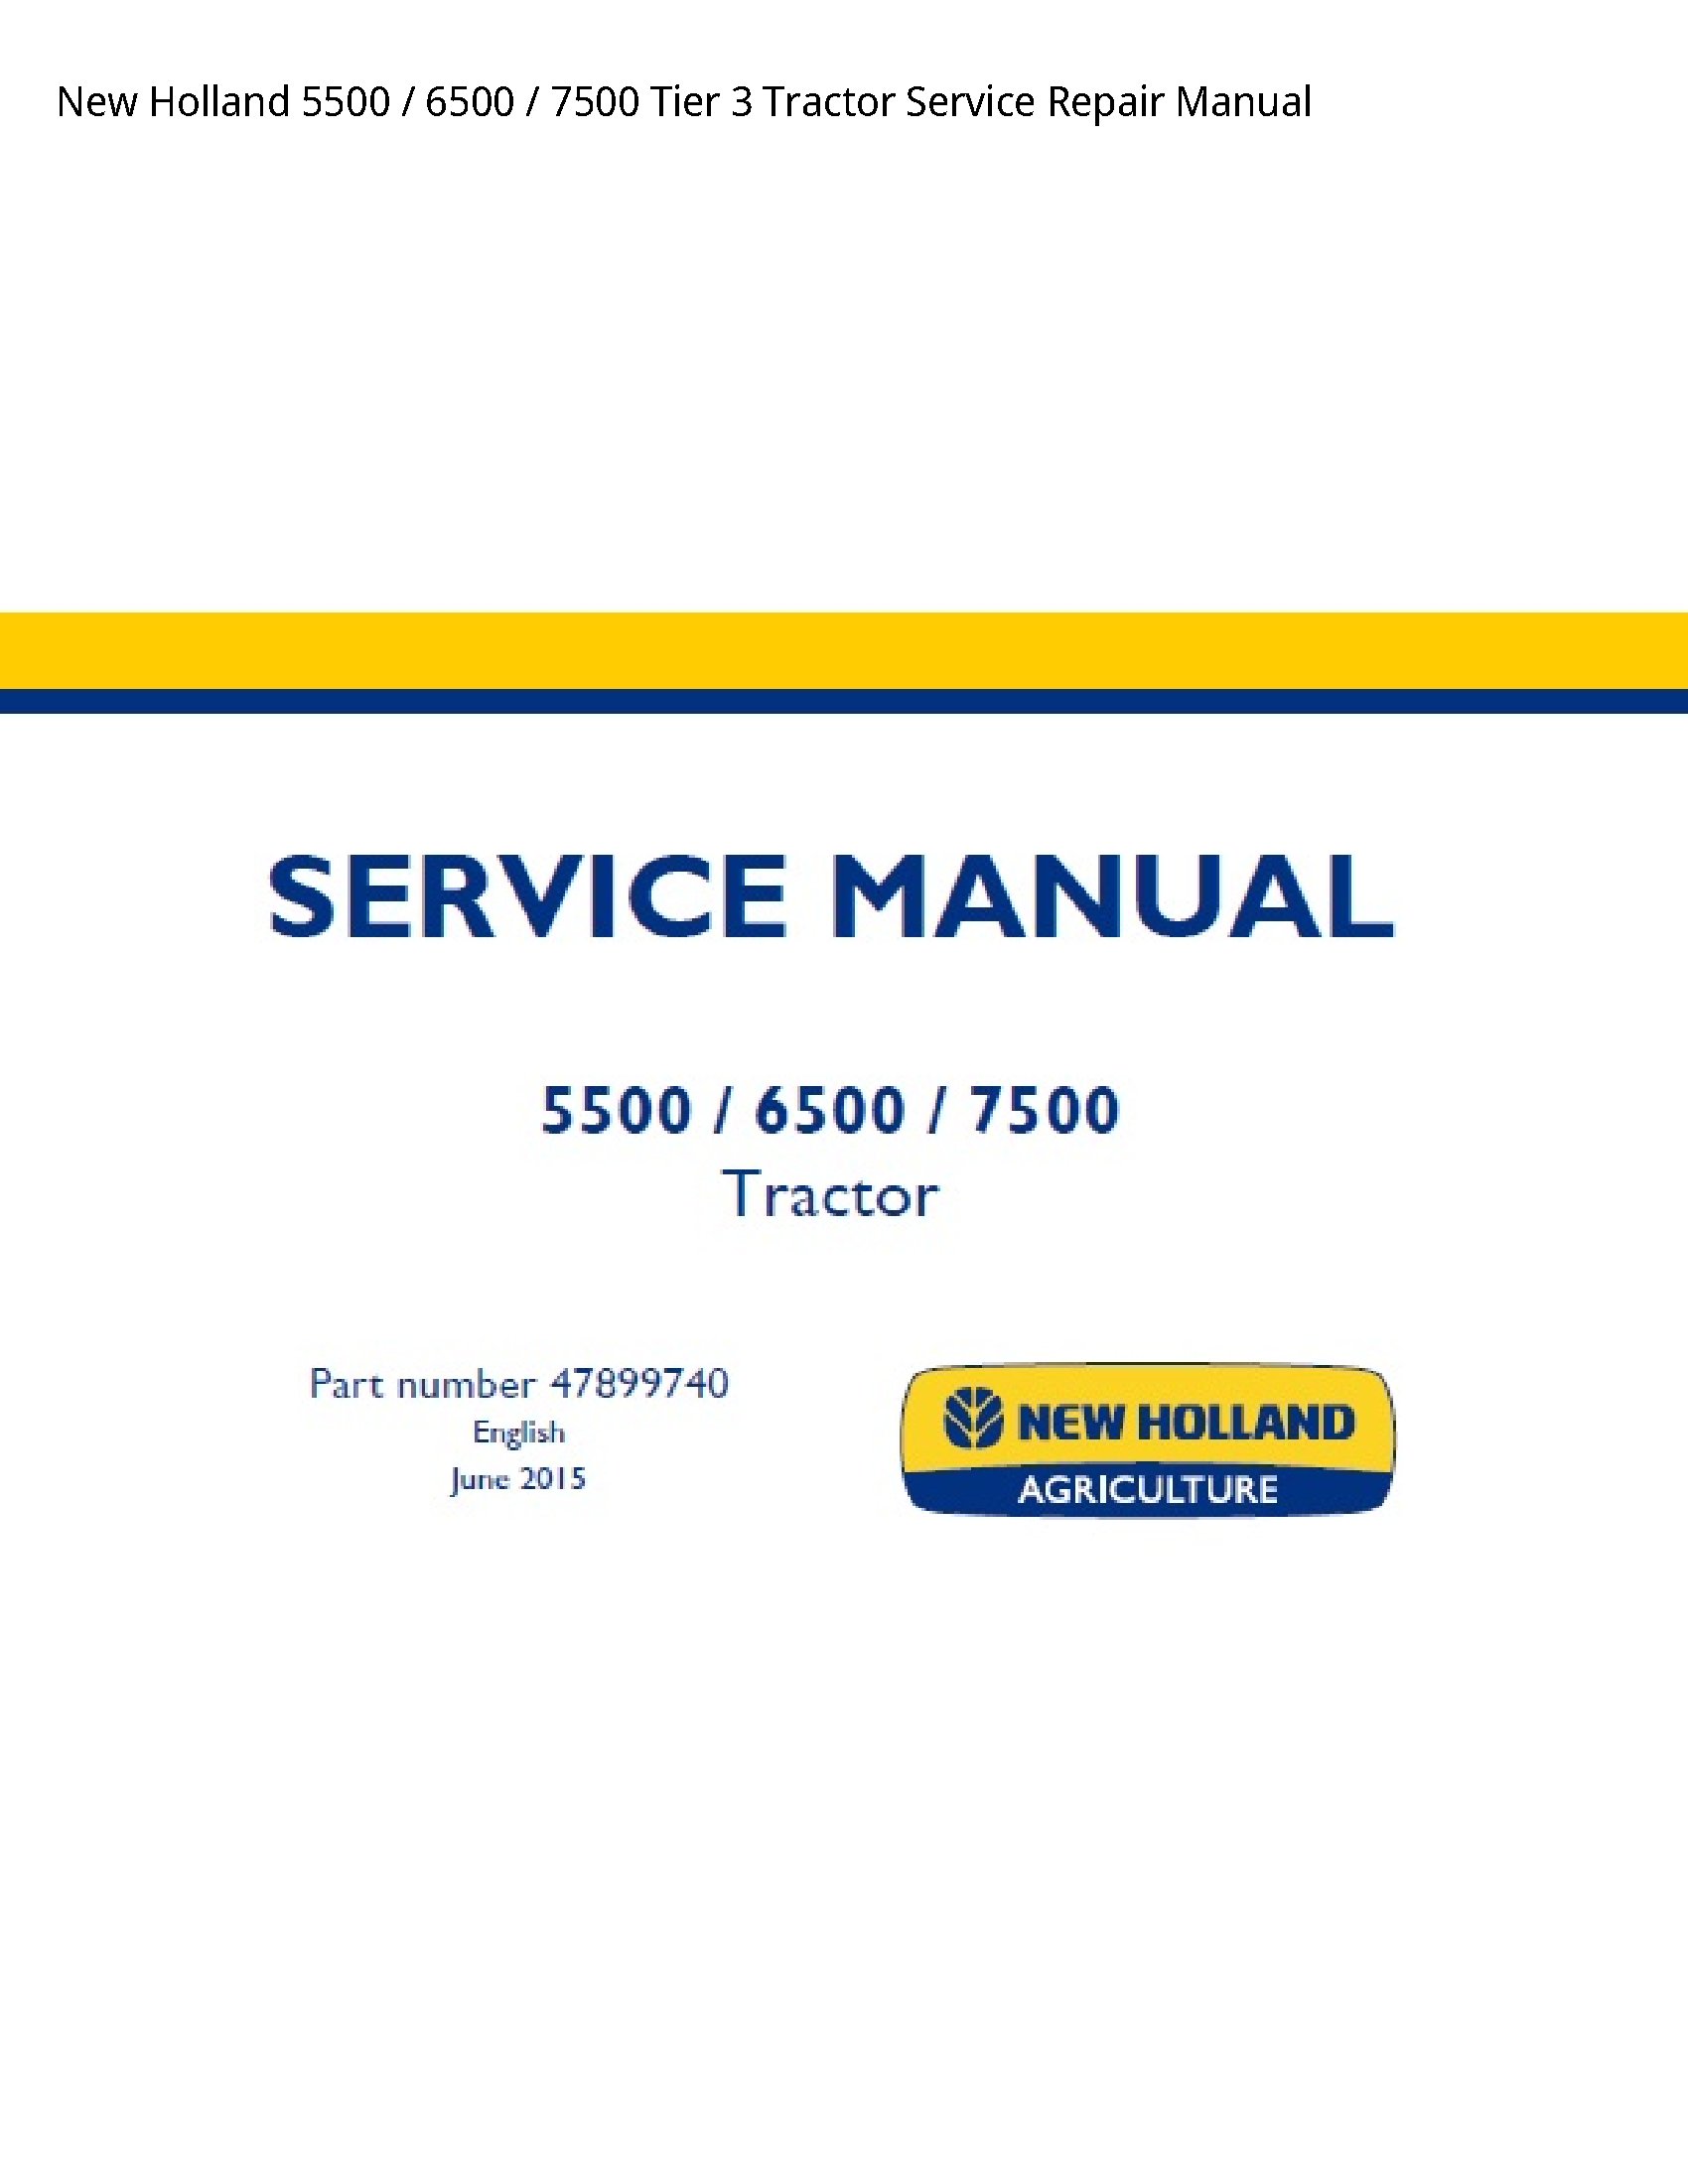 New Holland 5500 Tier Tractor manual